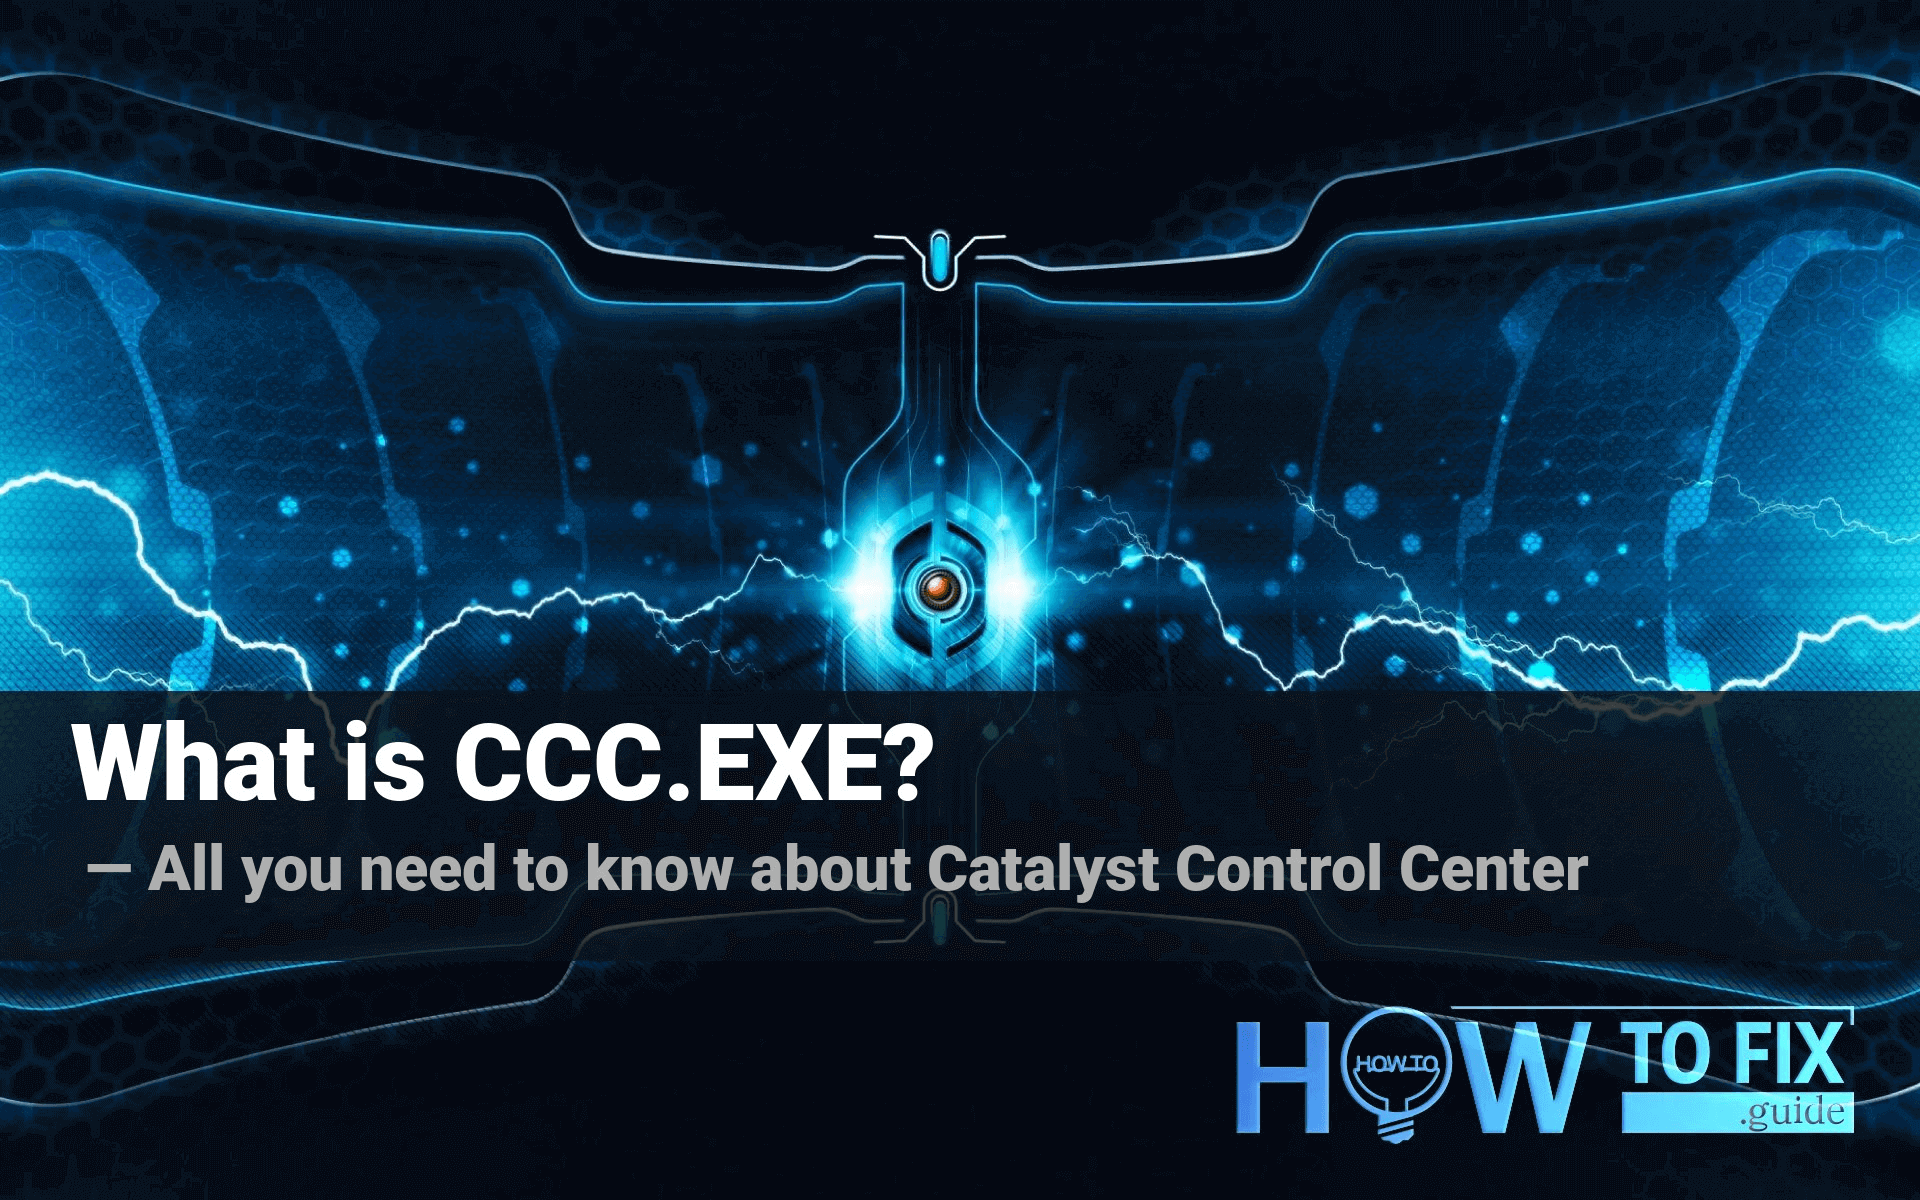 What is CCC.EXE? All you need to know about Catalyst Control Center